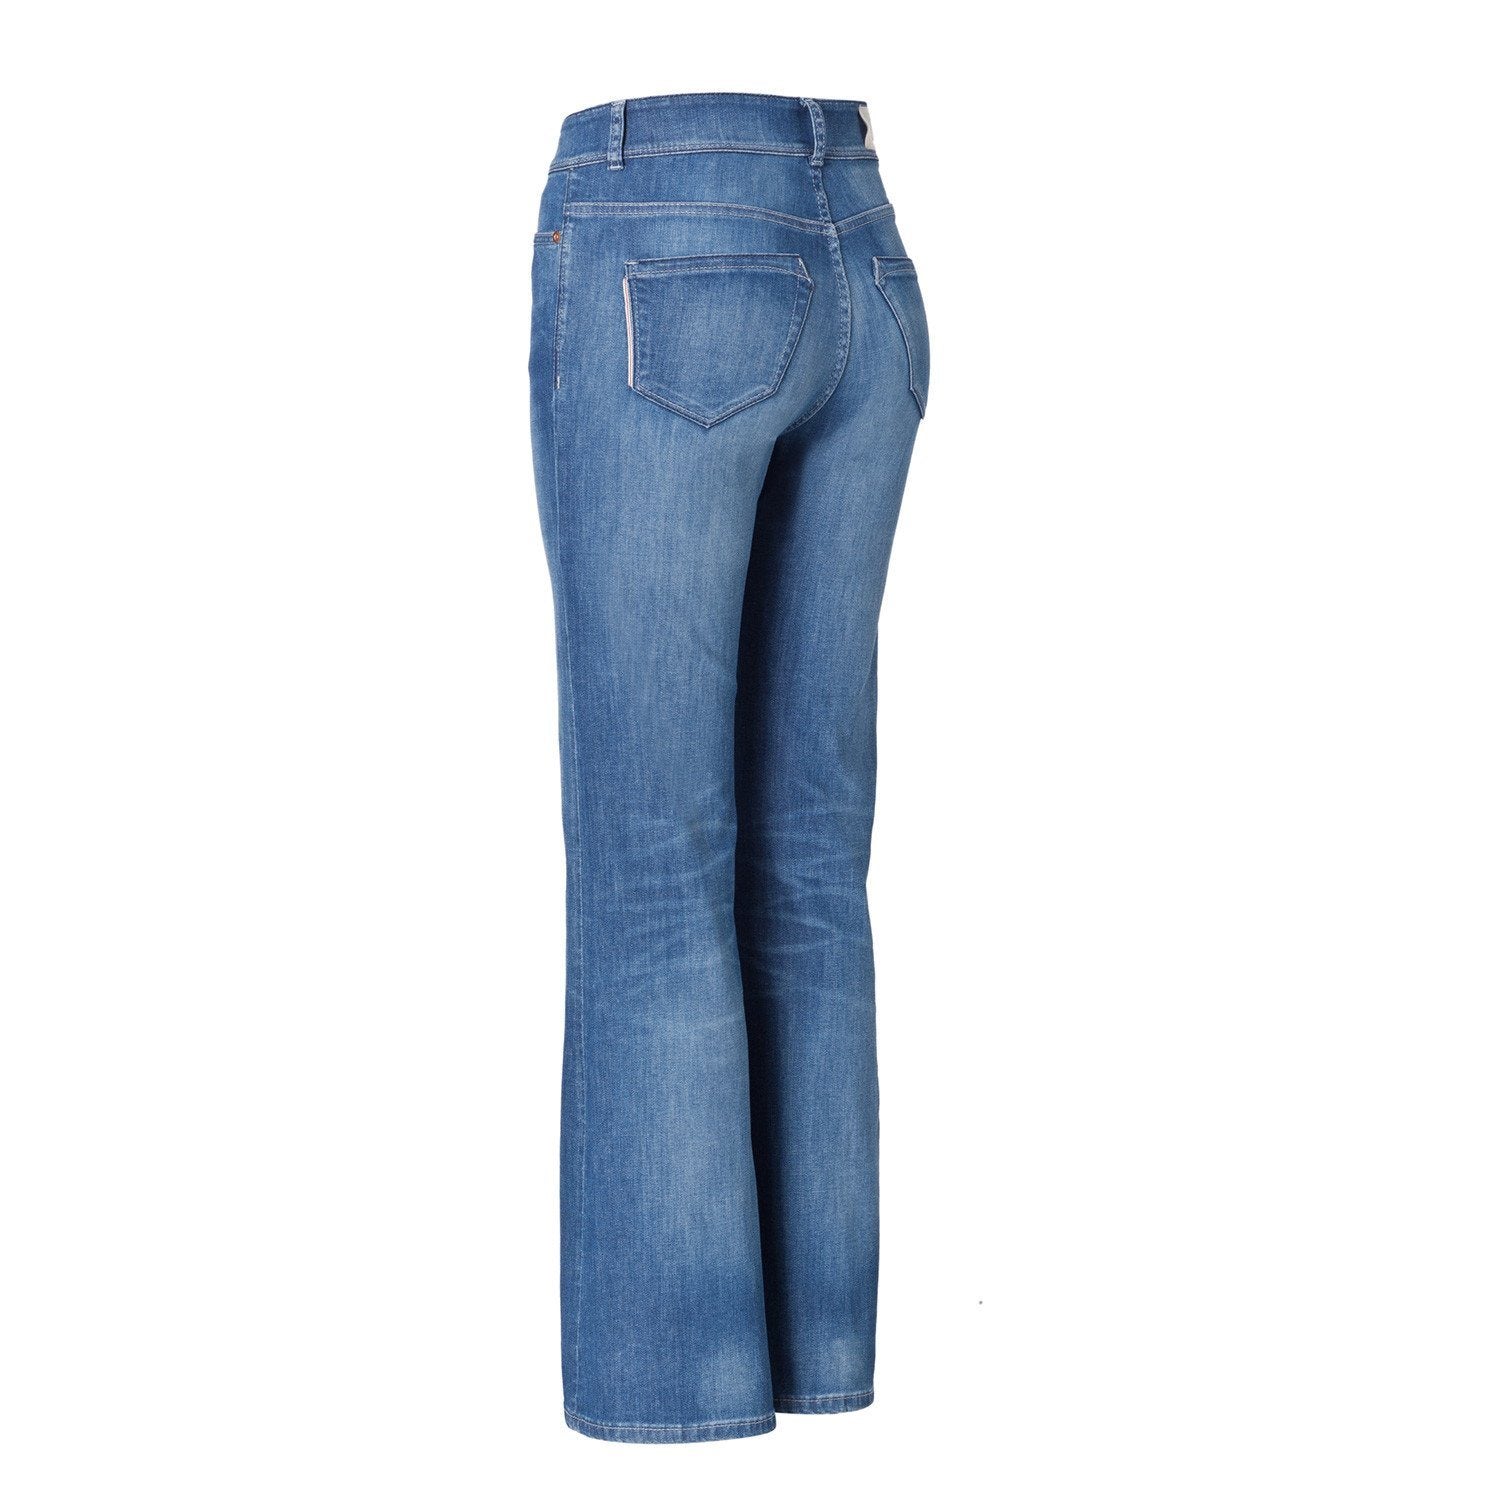 goodsociety Womens High Rise Slim Jeans - Raw One Wash